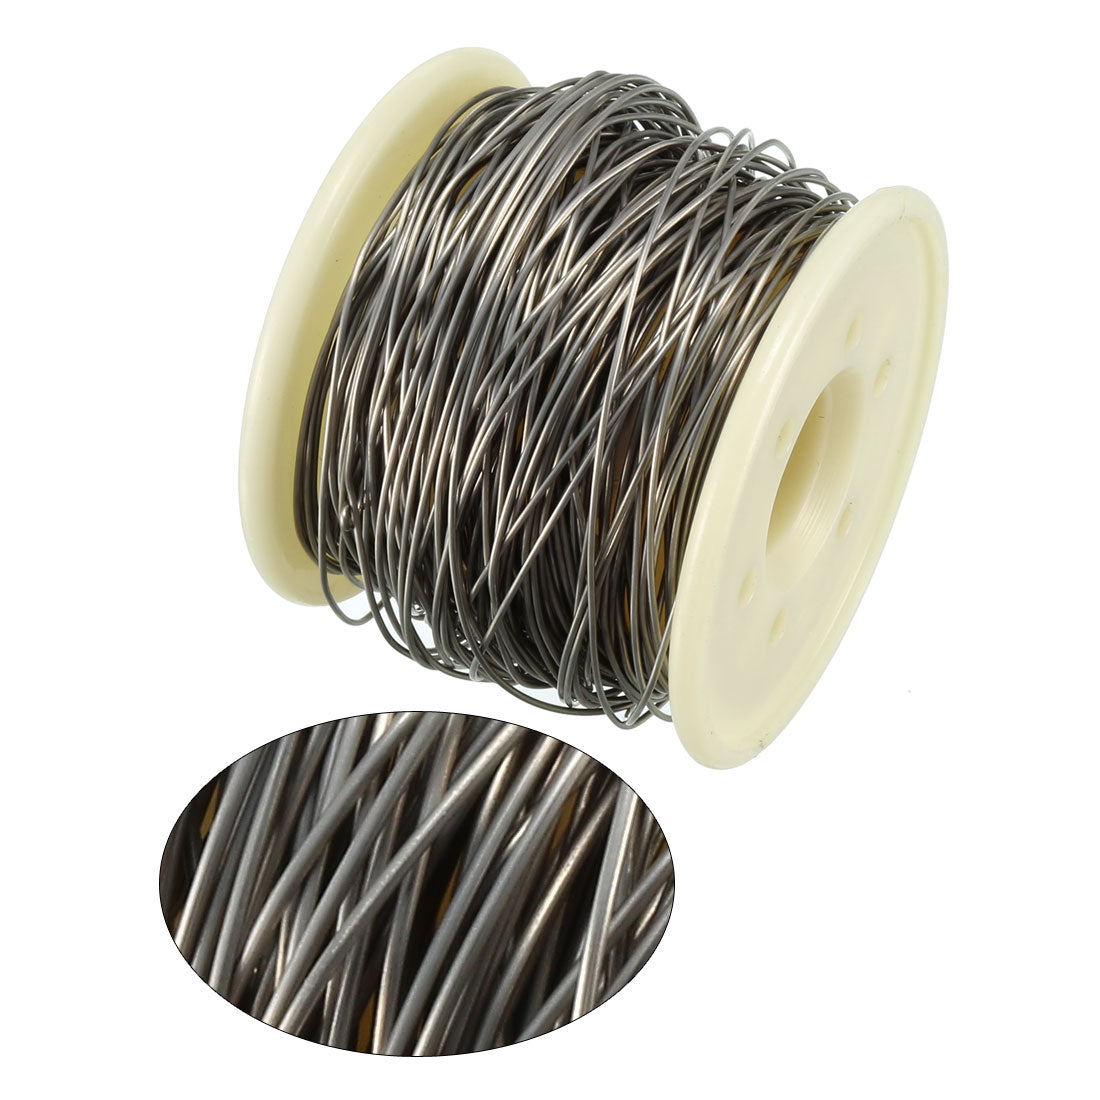 uxcell Uxcell 0.7mm 21AWG Heating Resistor Wire Nichrome Resistance Wires for Heating Elements 65.6ft